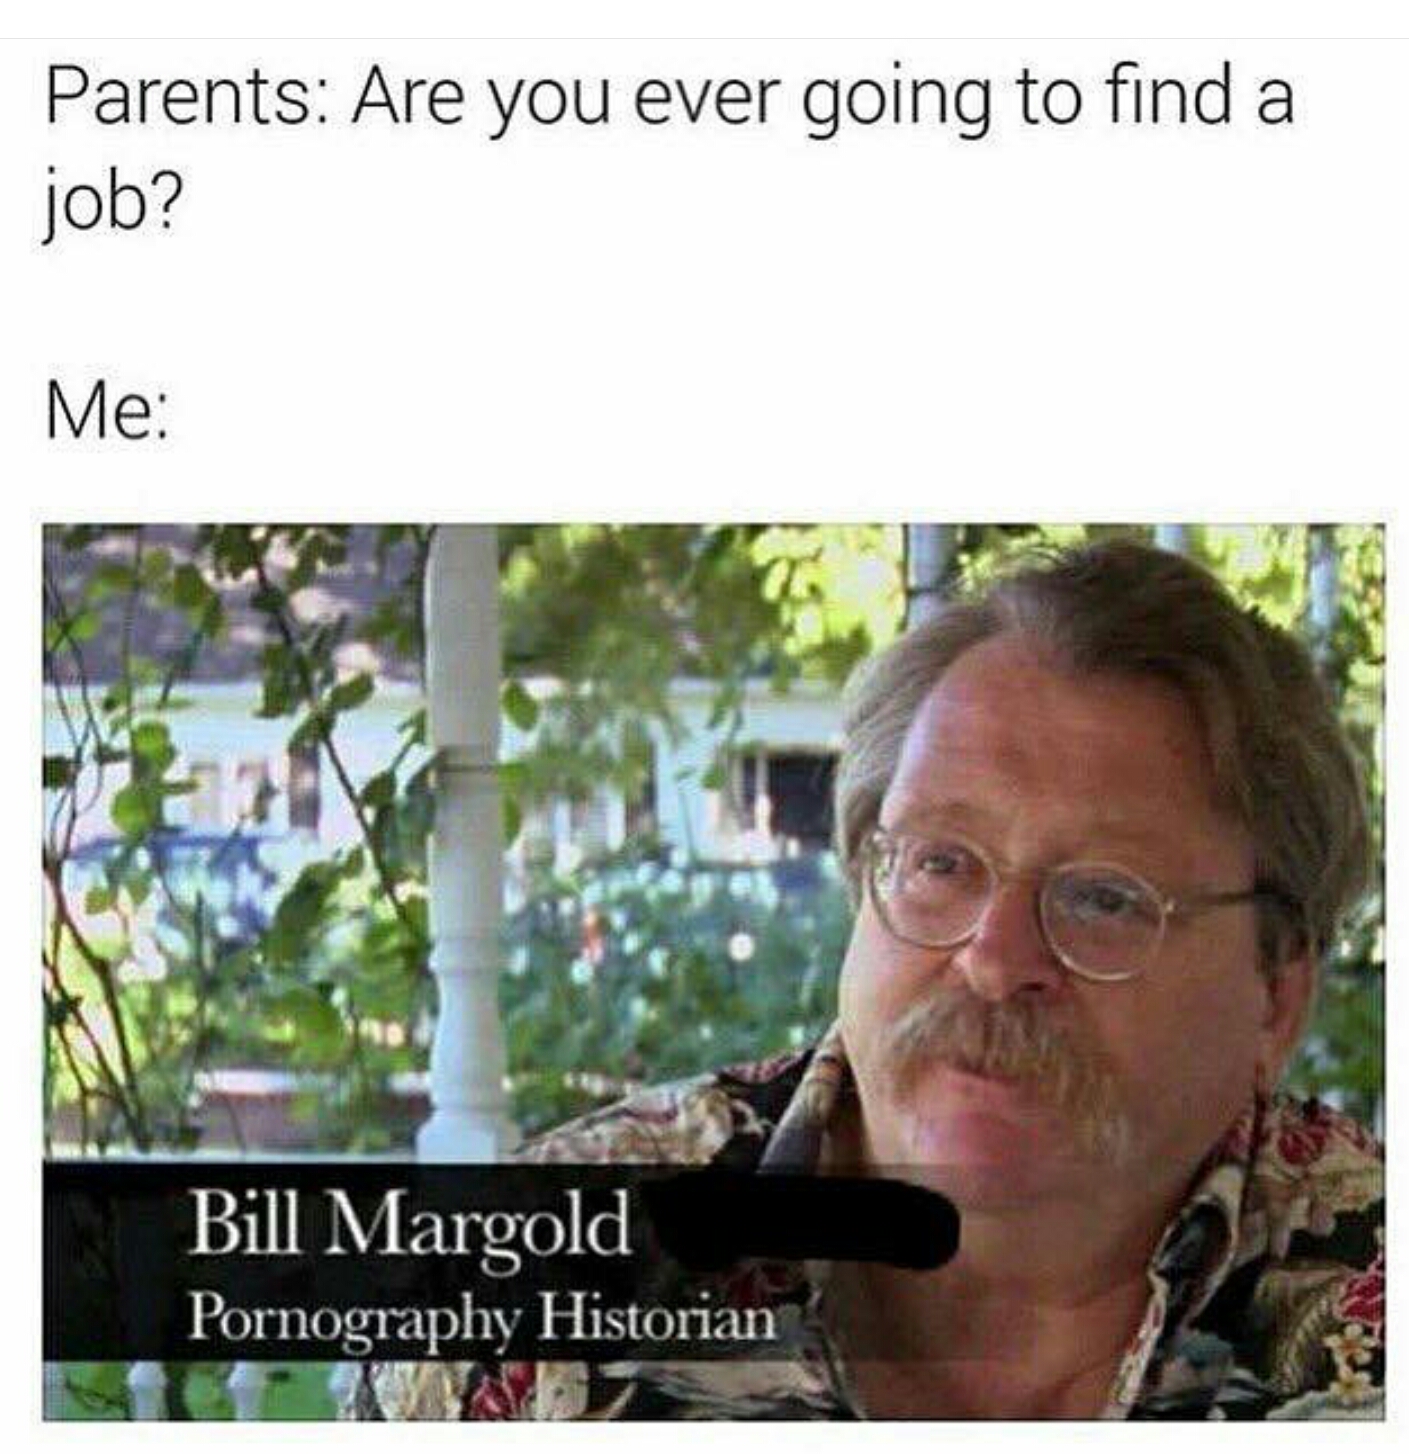 memes - pornography historian meme - Parents Are you ever going to find a job? Me Bill Margold Pornography Historian Ya